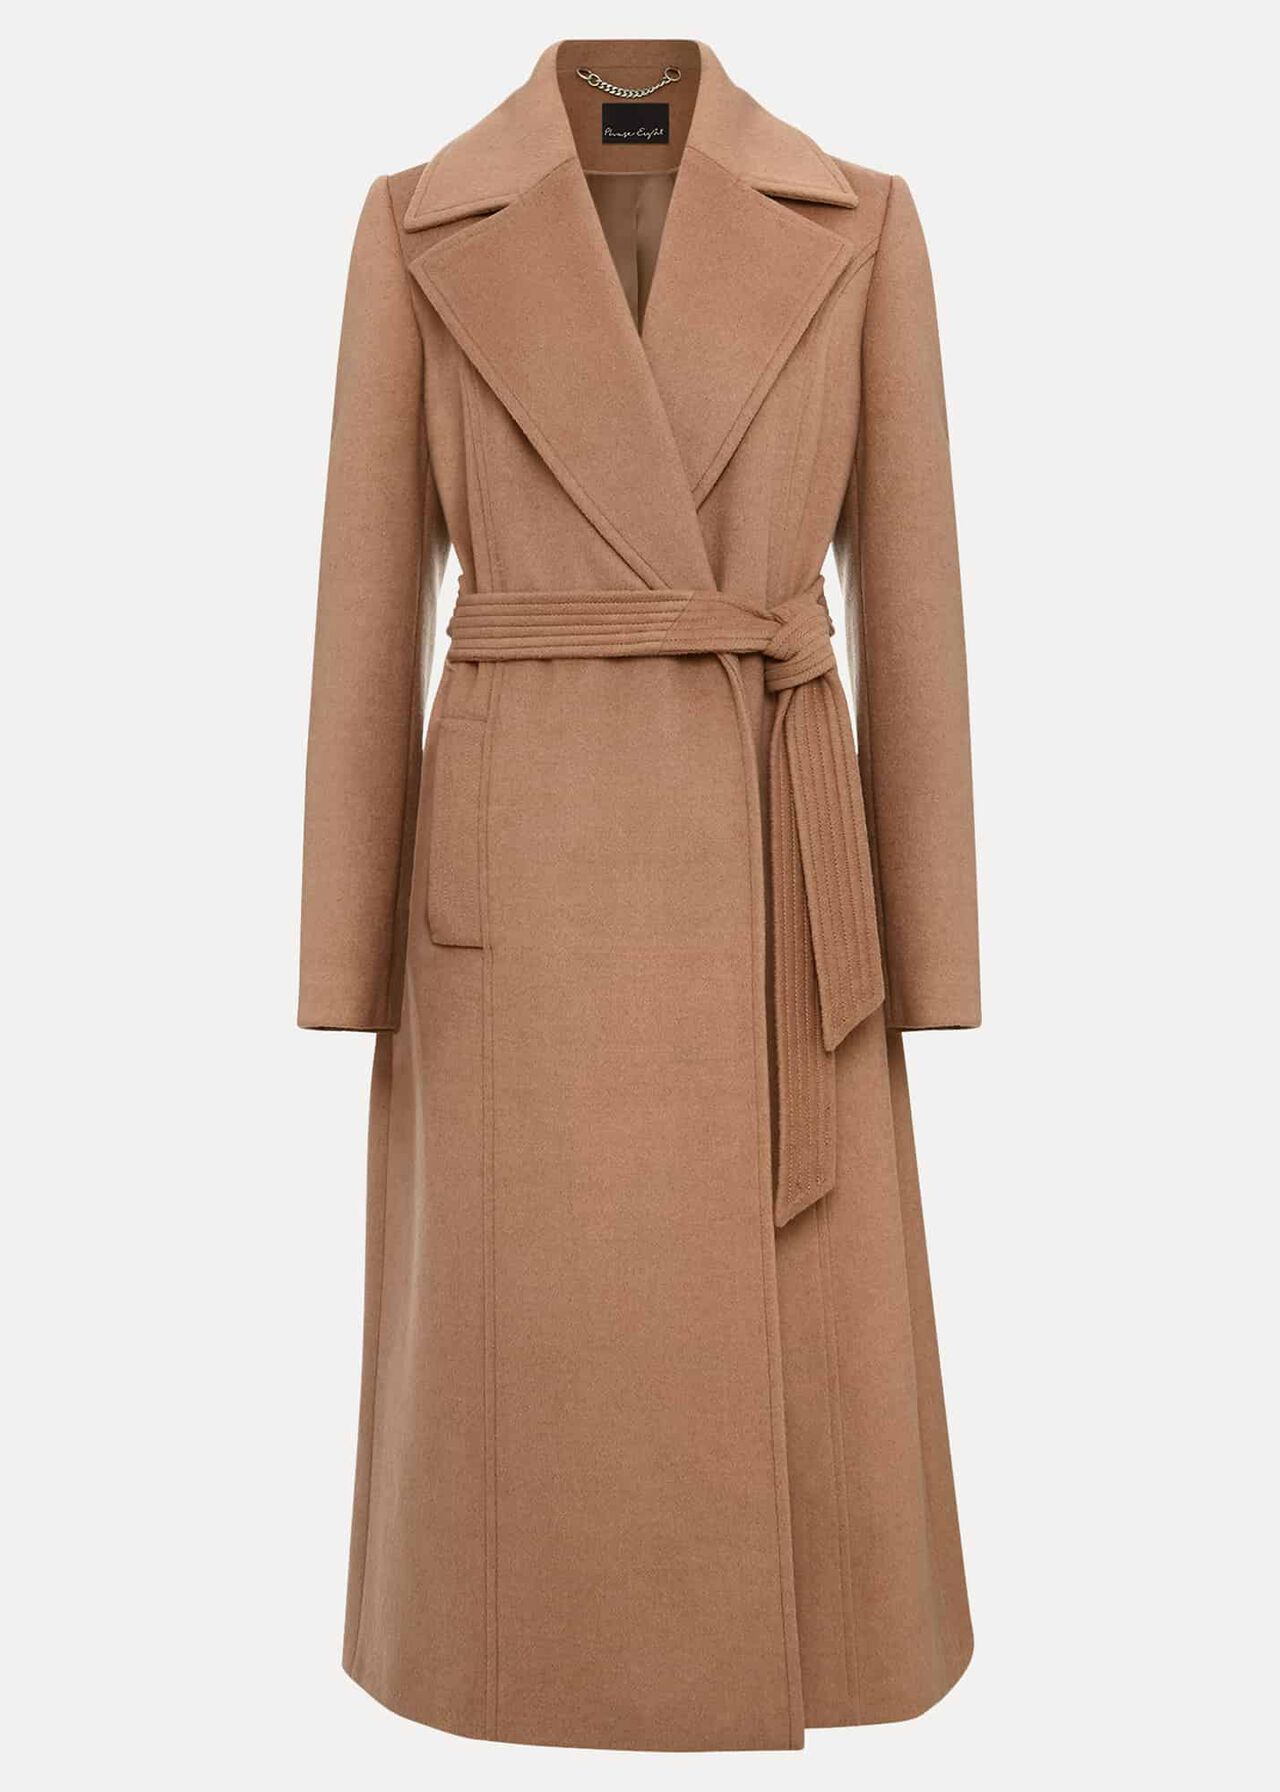 Livvy Wool Camel Trench Coat